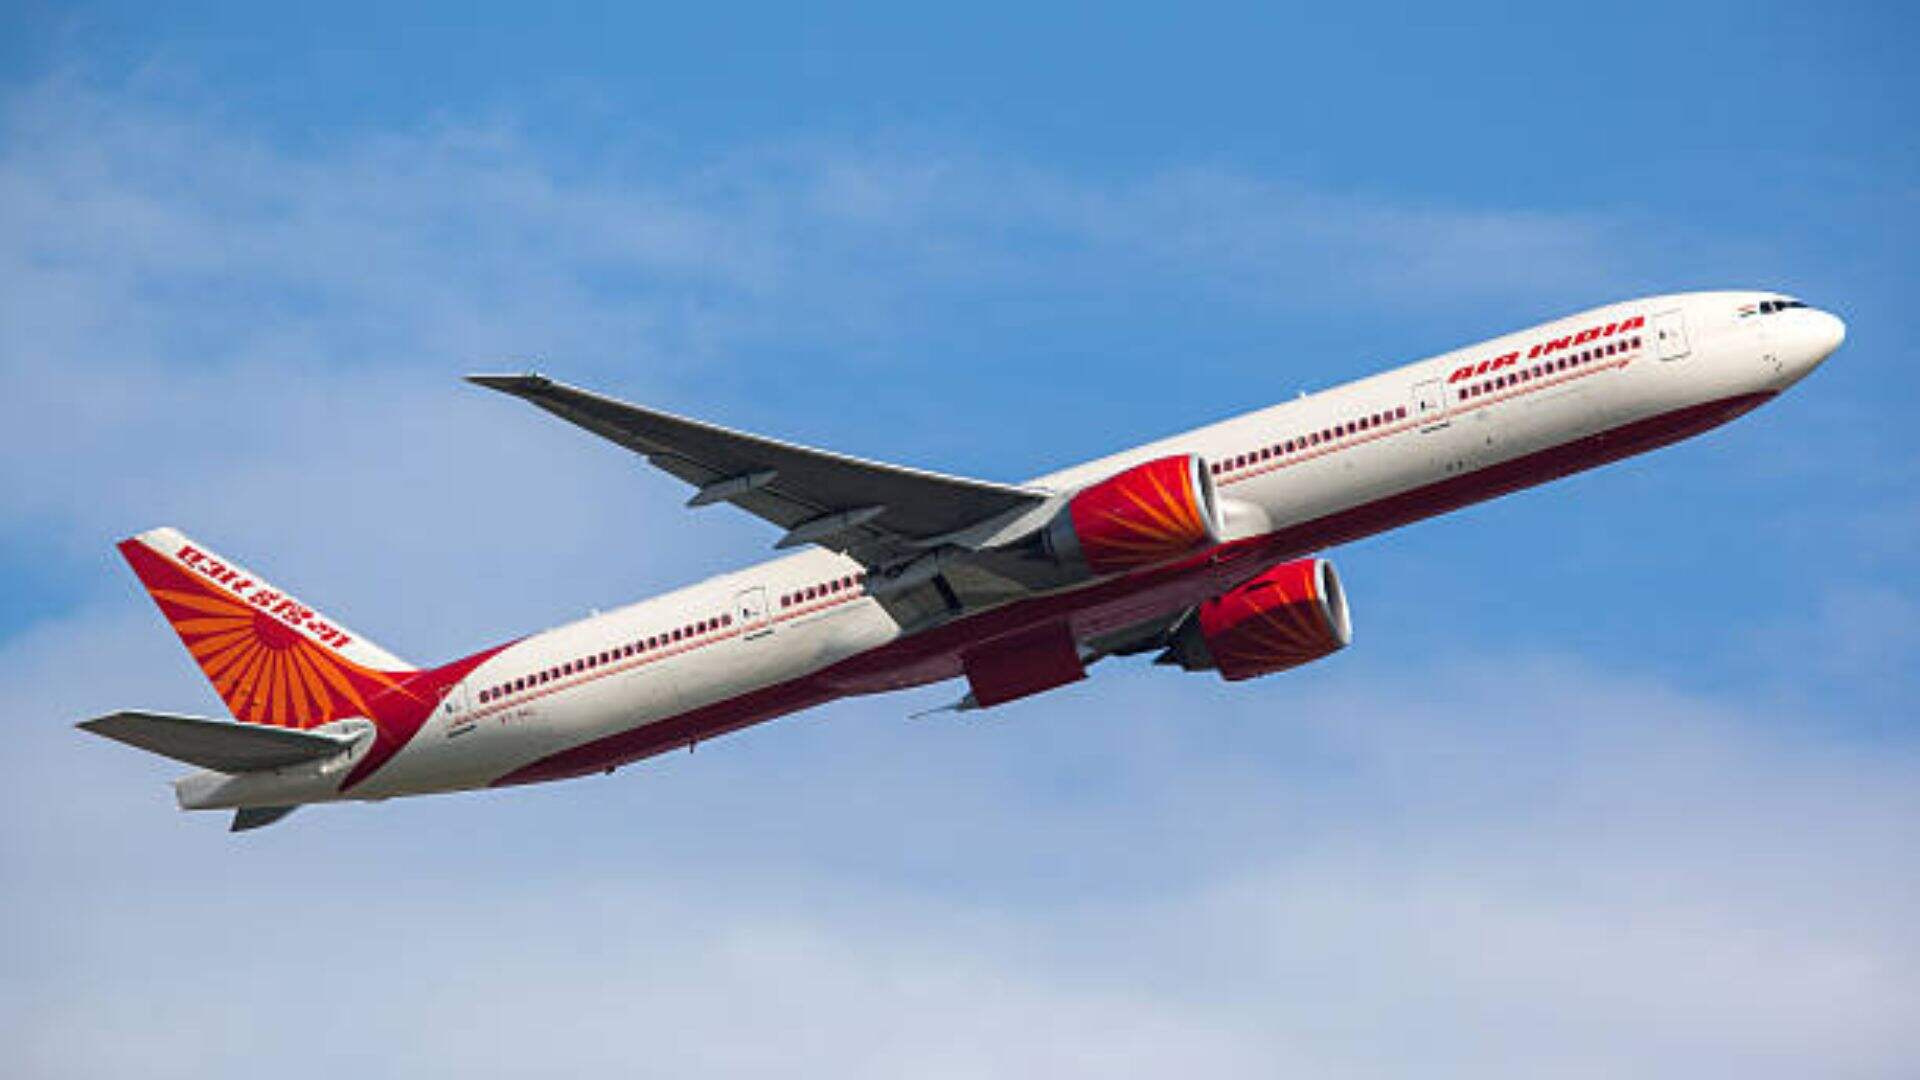 Air India Flight Collides With Tug Truck At Pune Airport